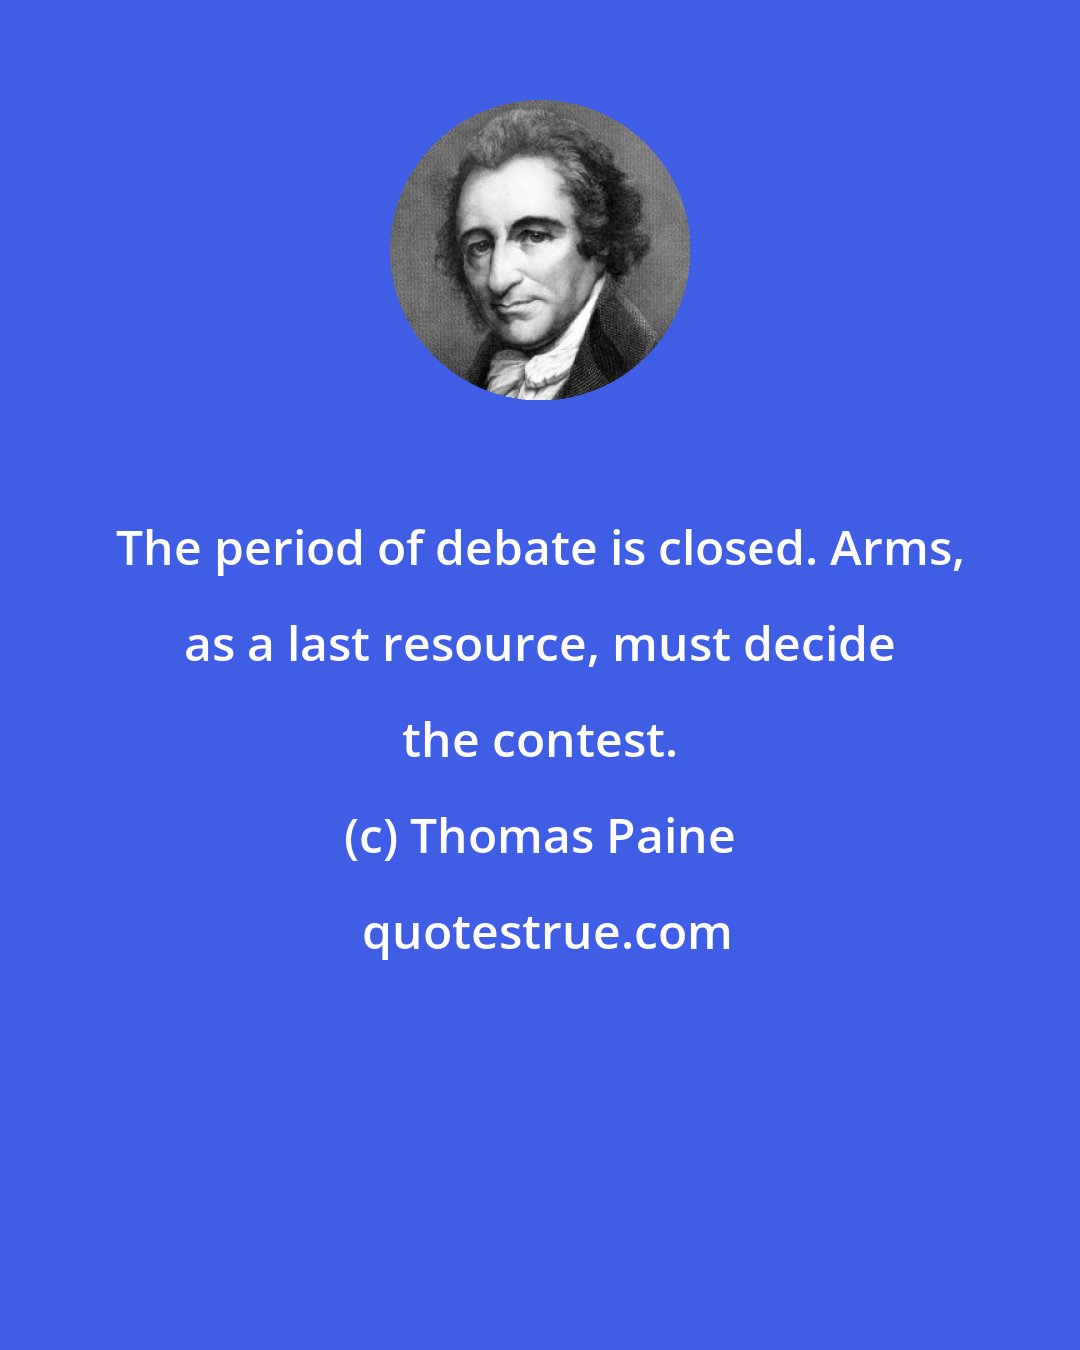 Thomas Paine: The period of debate is closed. Arms, as a last resource, must decide the contest.